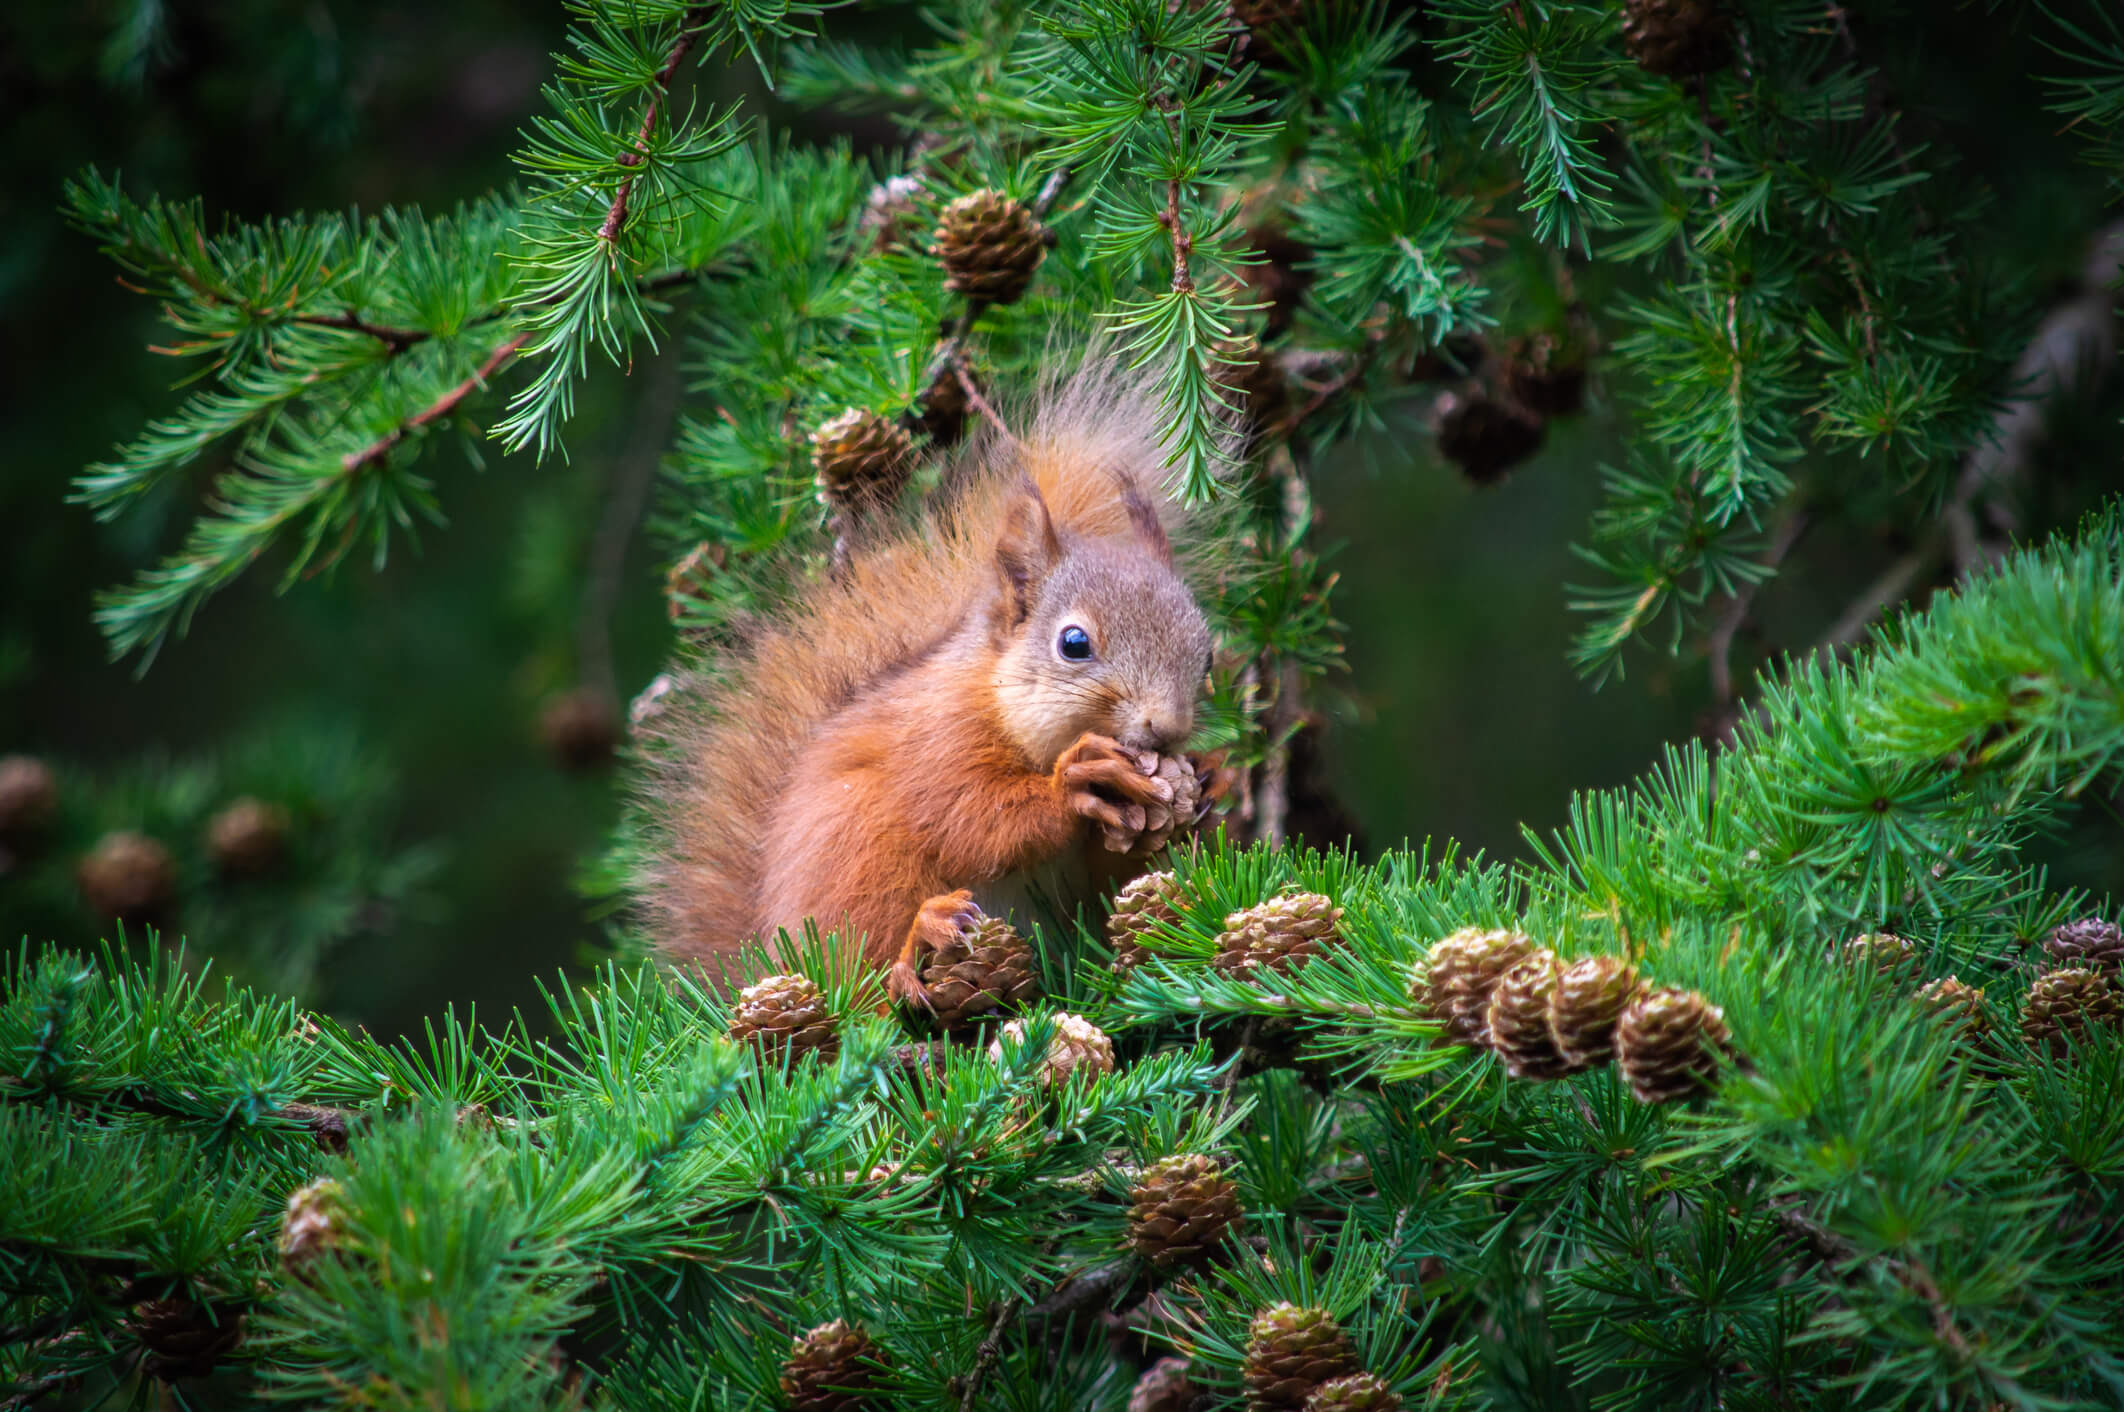 Red squirrel feeding from pine cones